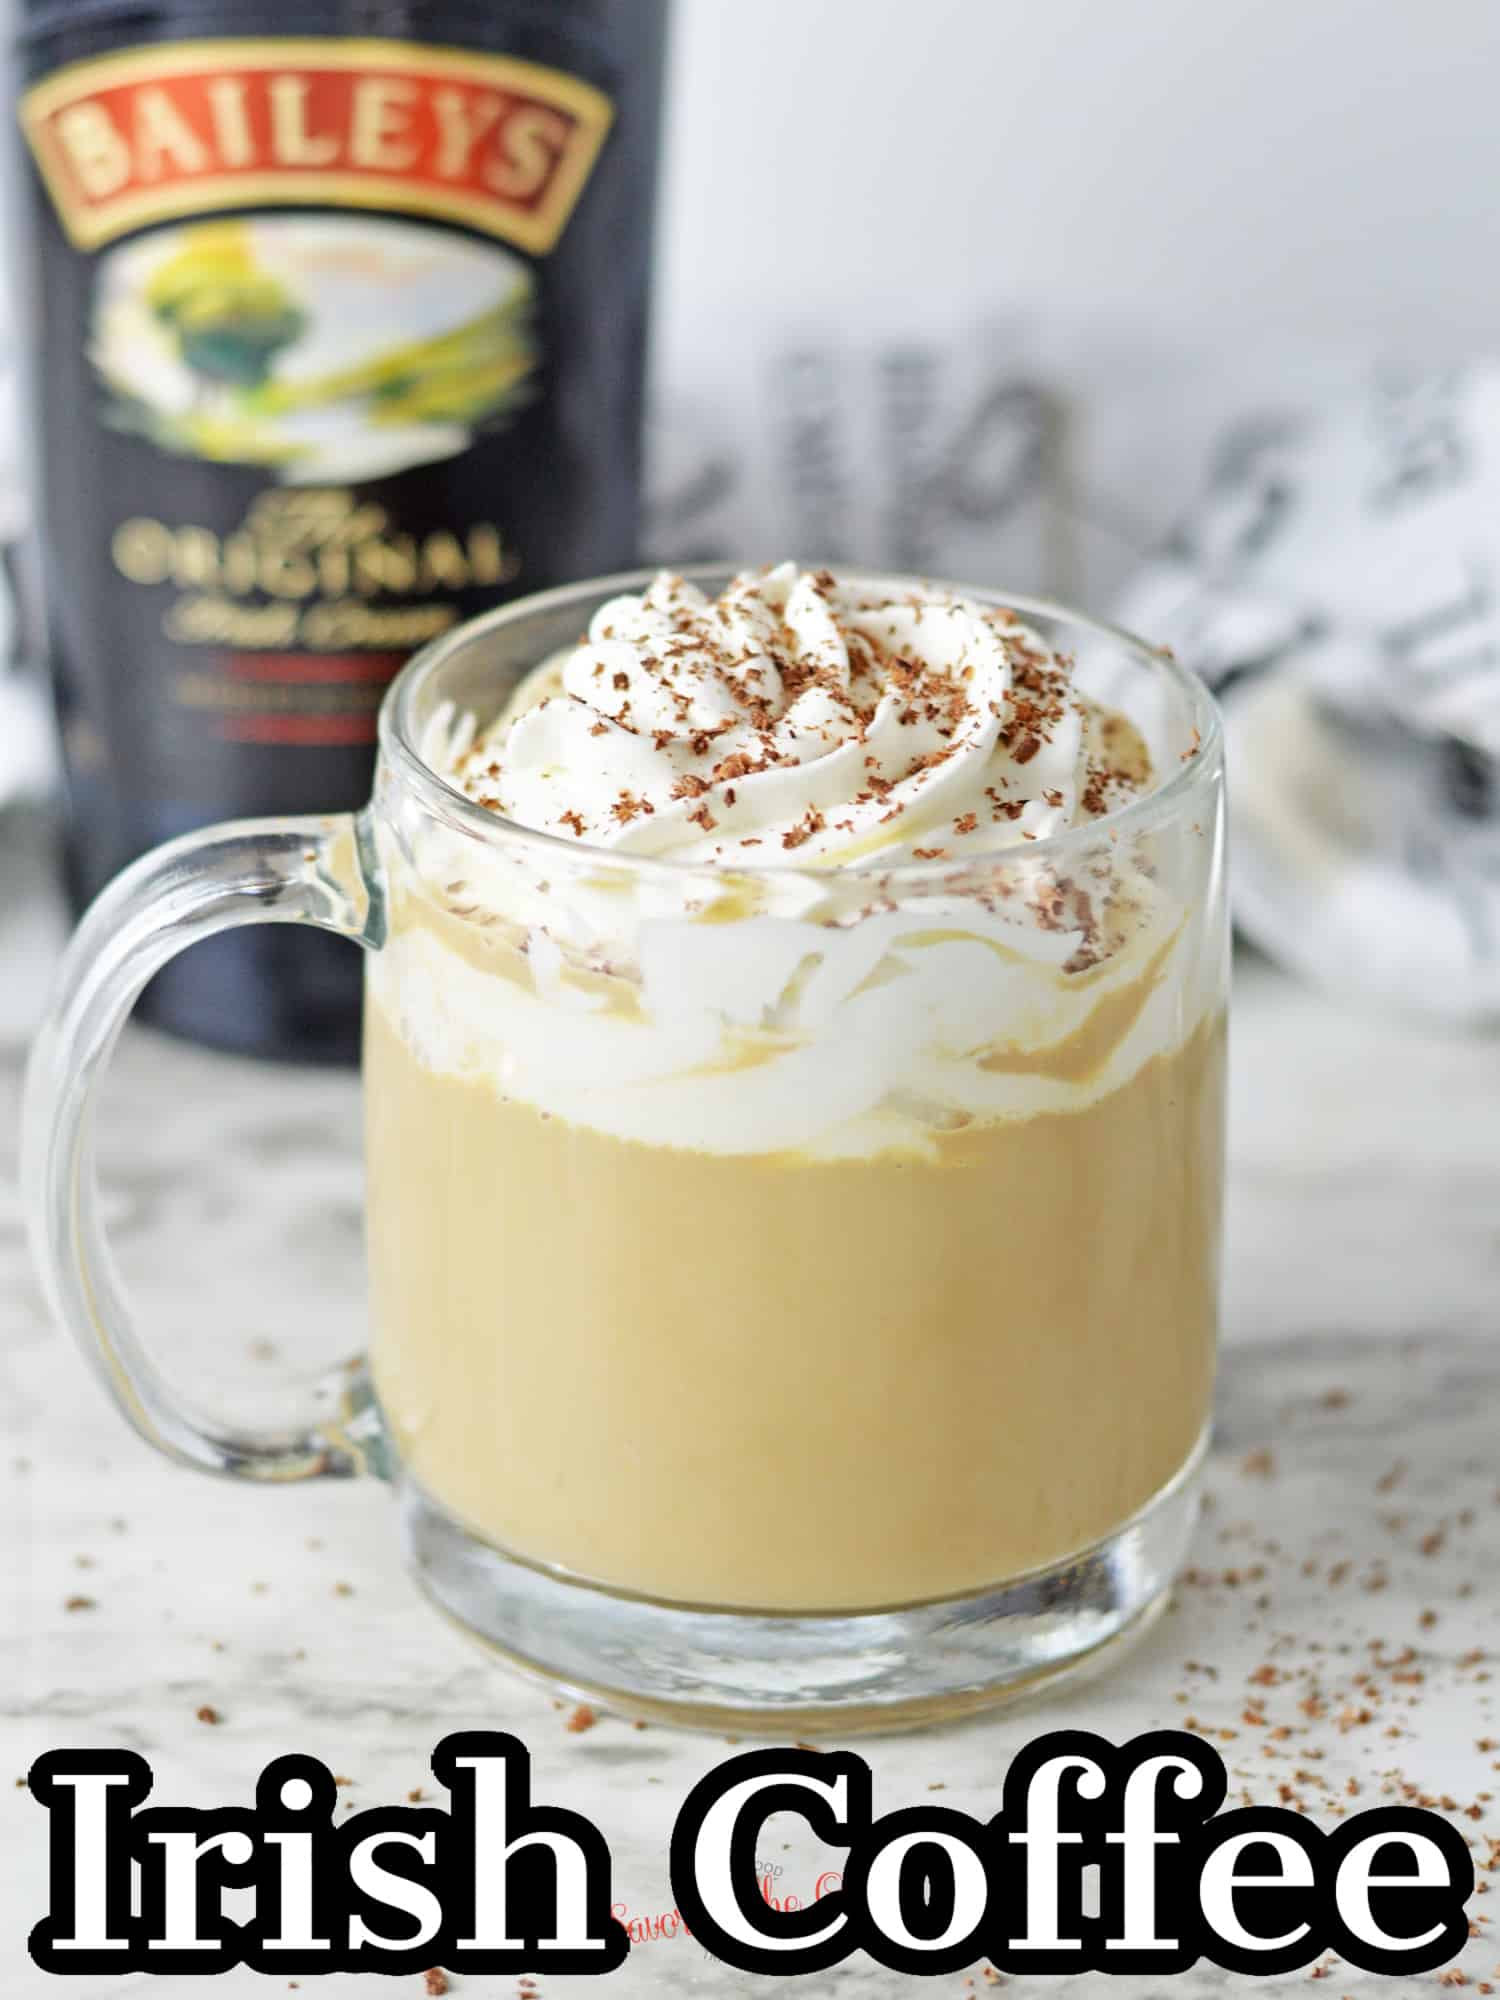 clear mug of baileys irish coffee with whipped cream and chocoalte shavings, text on the image for Pinterest.